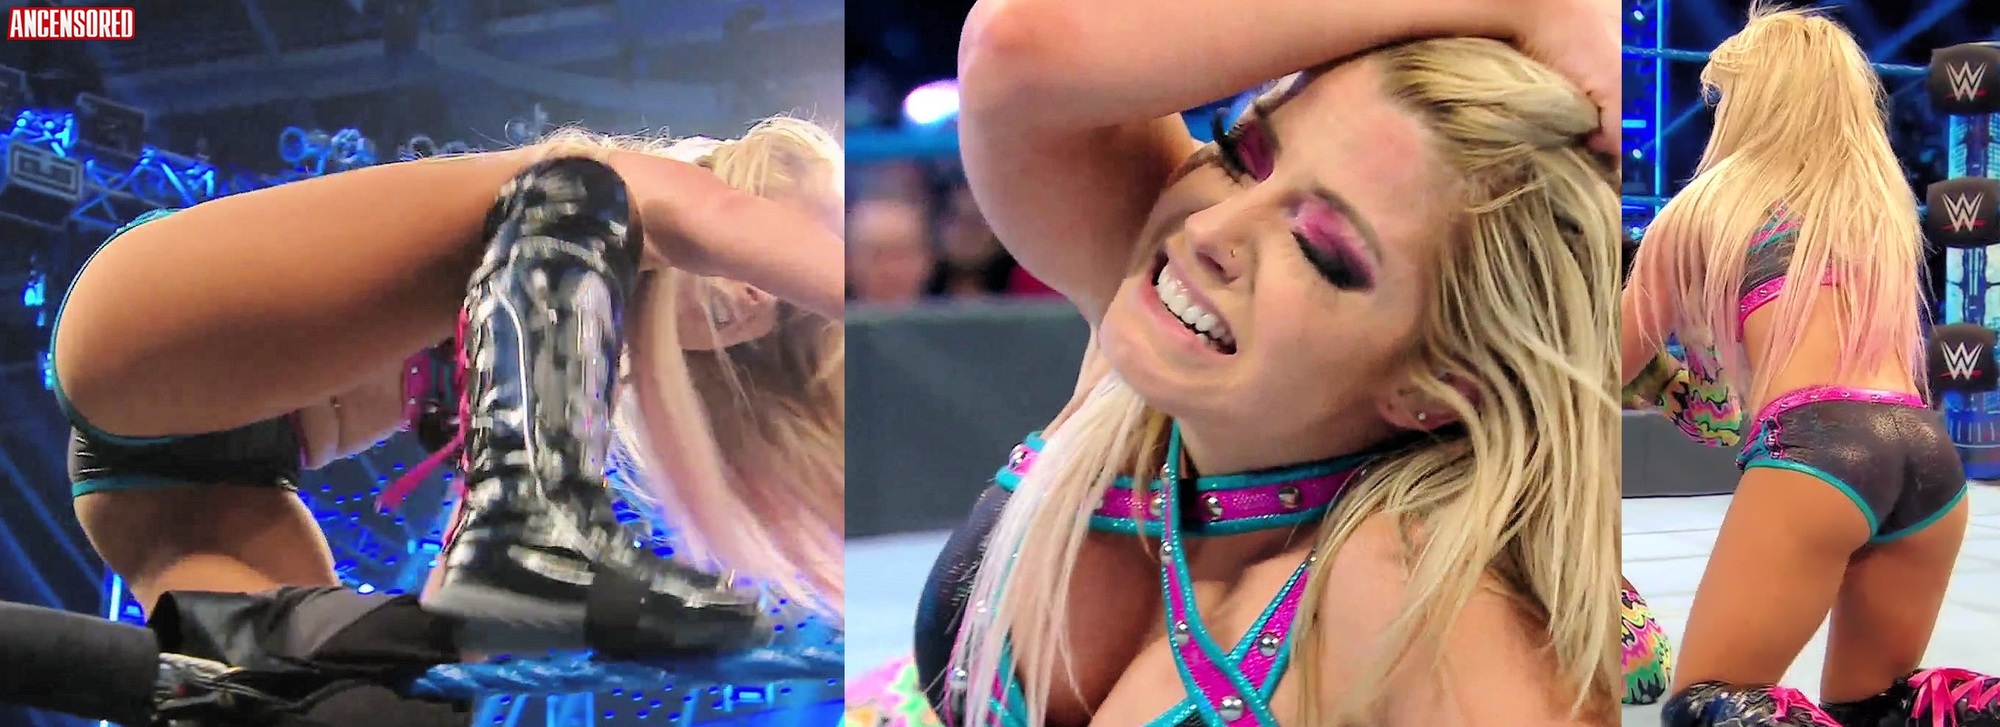 Bliss nude pictures alexa Blissed Off: